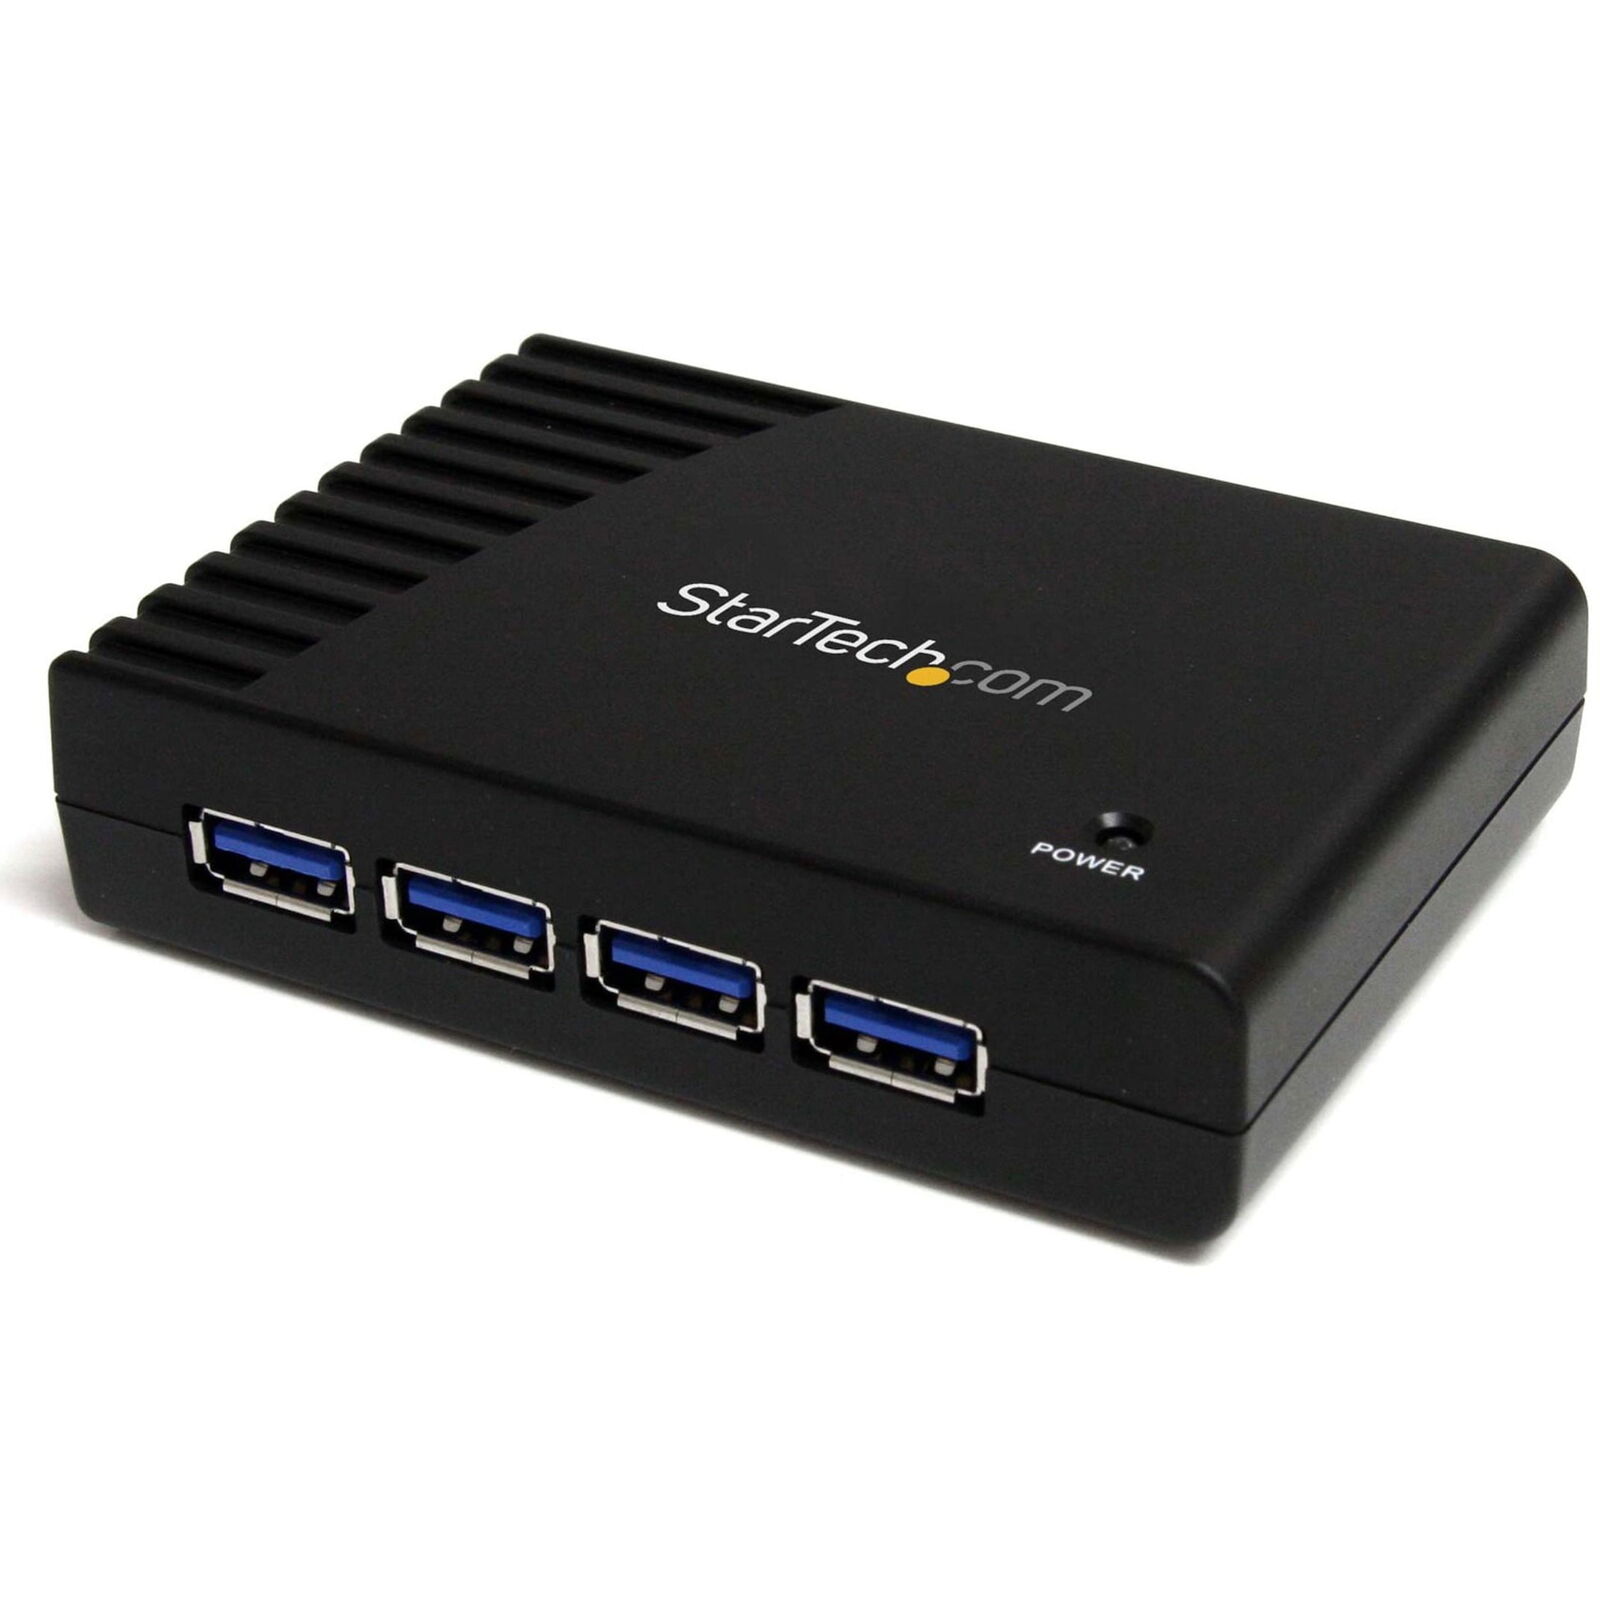 StarTech.com 4-Port USB 3.0 SuperSpeed Hub with Power Adapter - 5Gbps - Portable